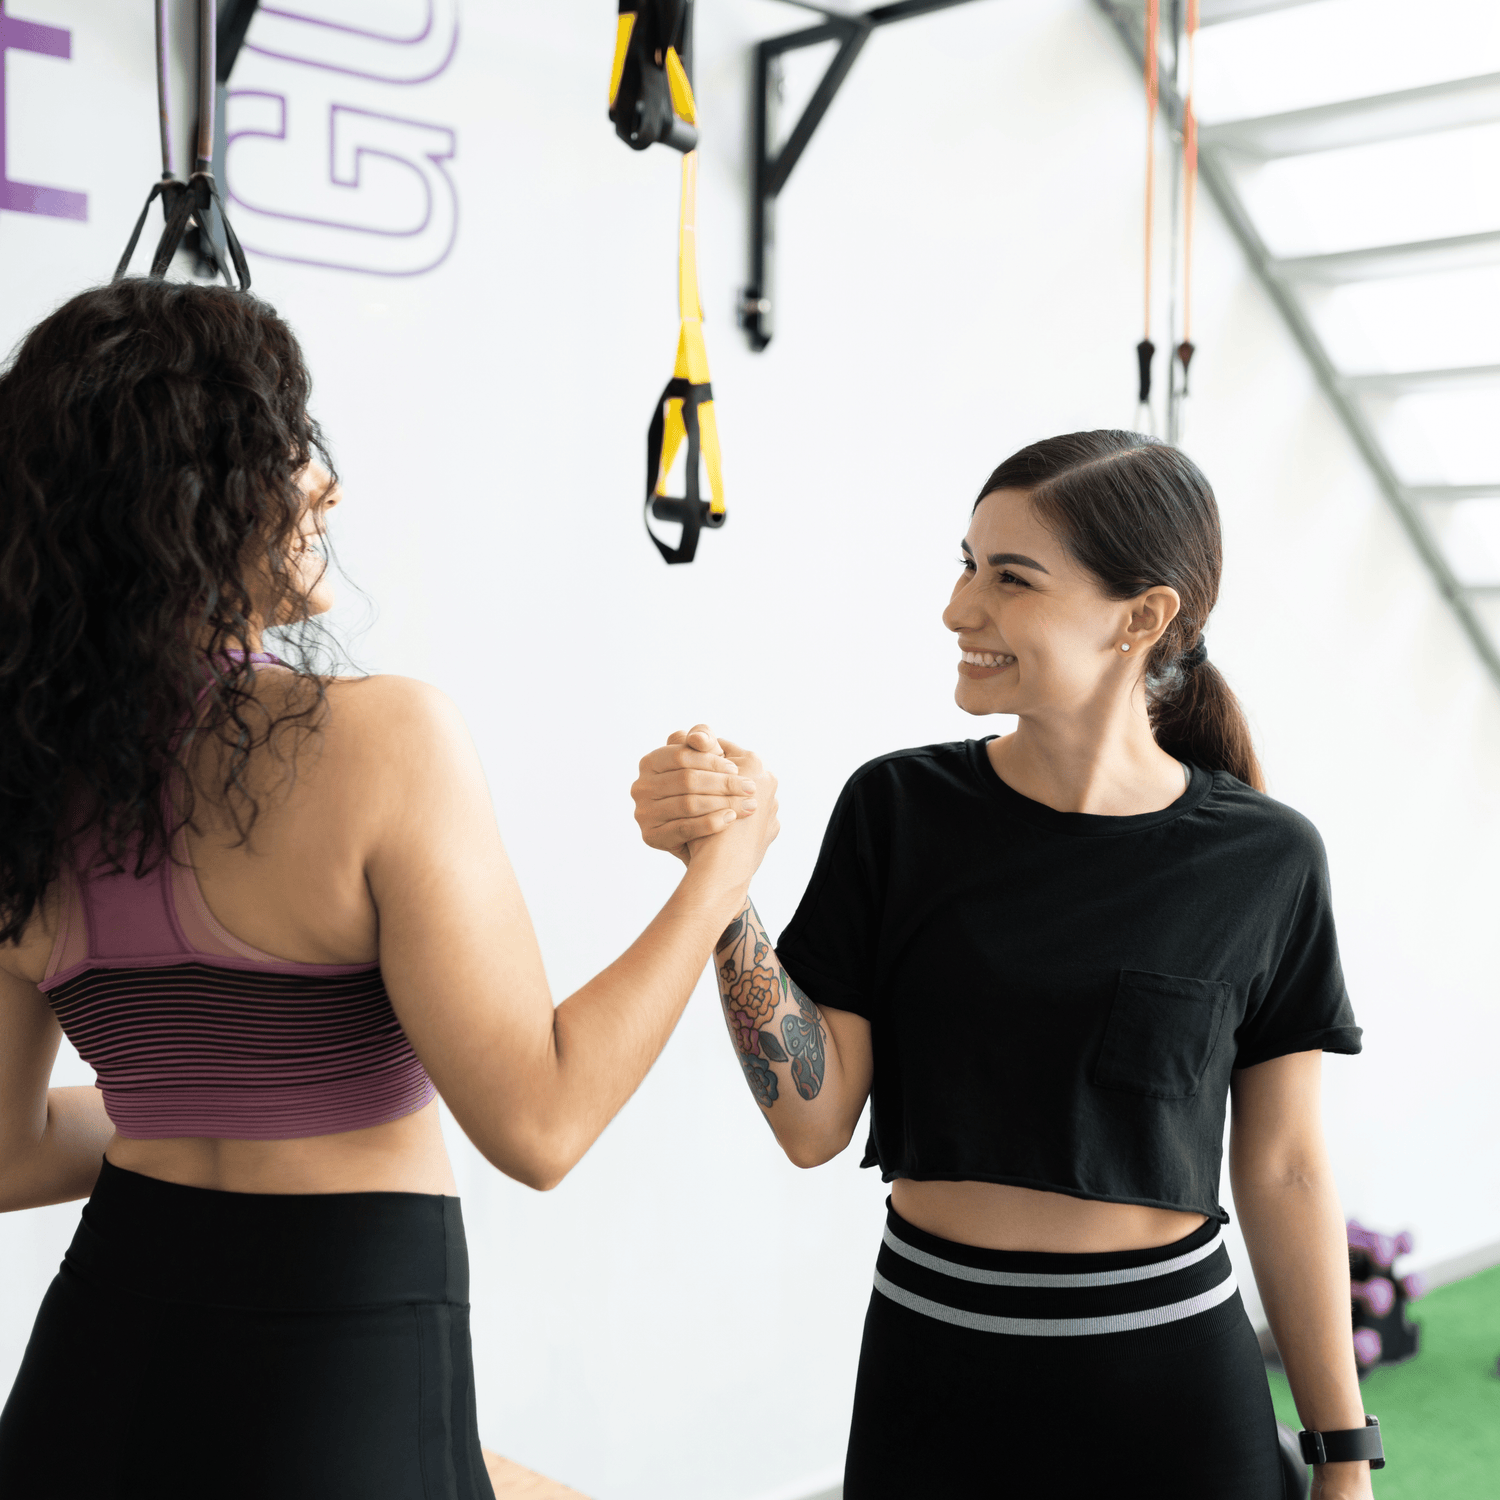 4 ways to feel more confident in the gym